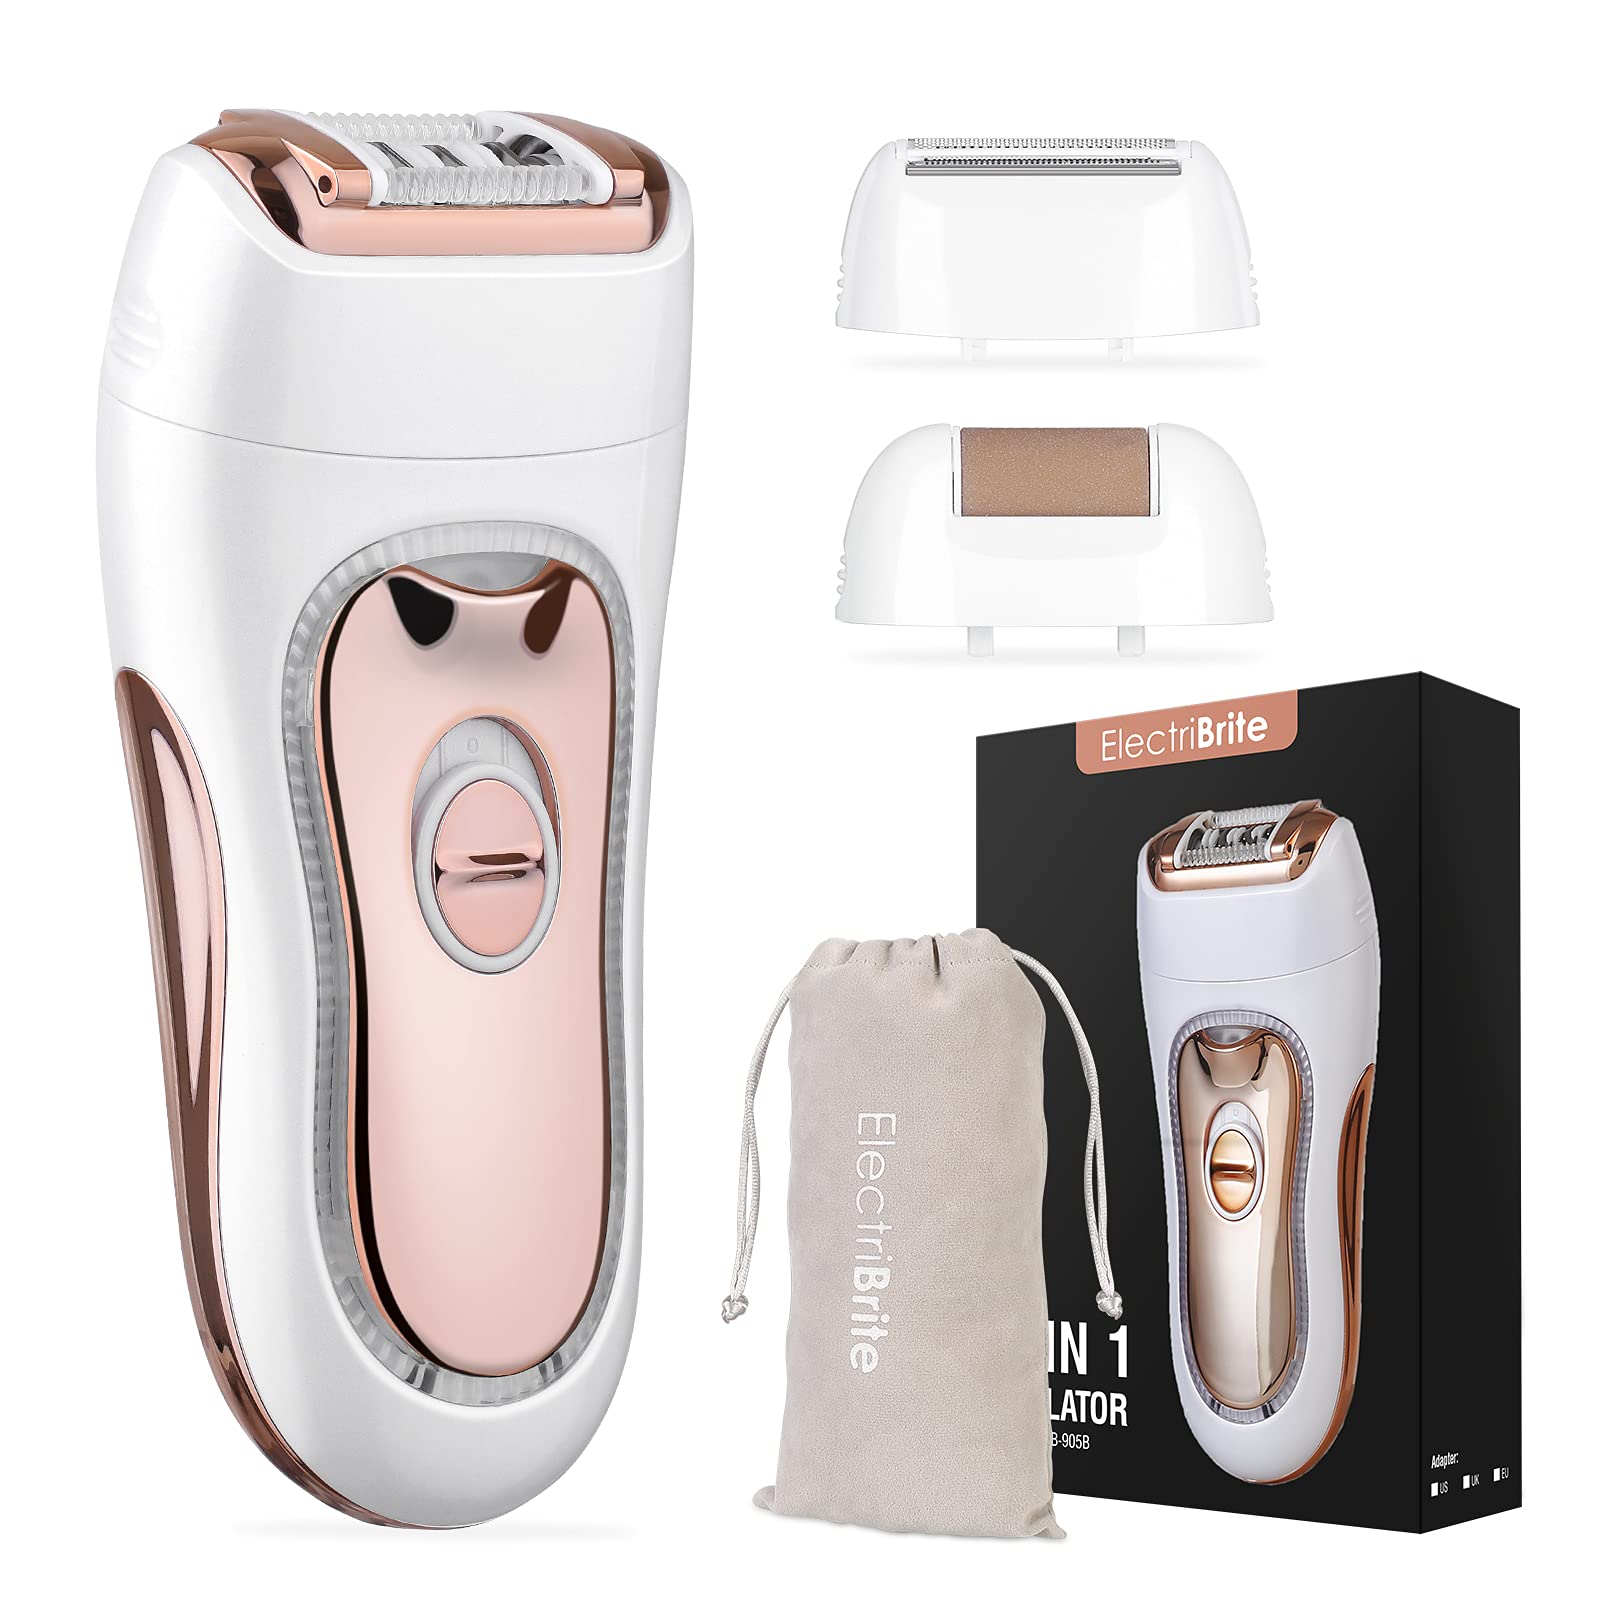 Epilator for Women - 3 in 1 Epilators Hair Removal for Women with Lady Shaver and Callus Remover, Electric Tweezers Face Hair Remover for Legs, Bikini, Arms